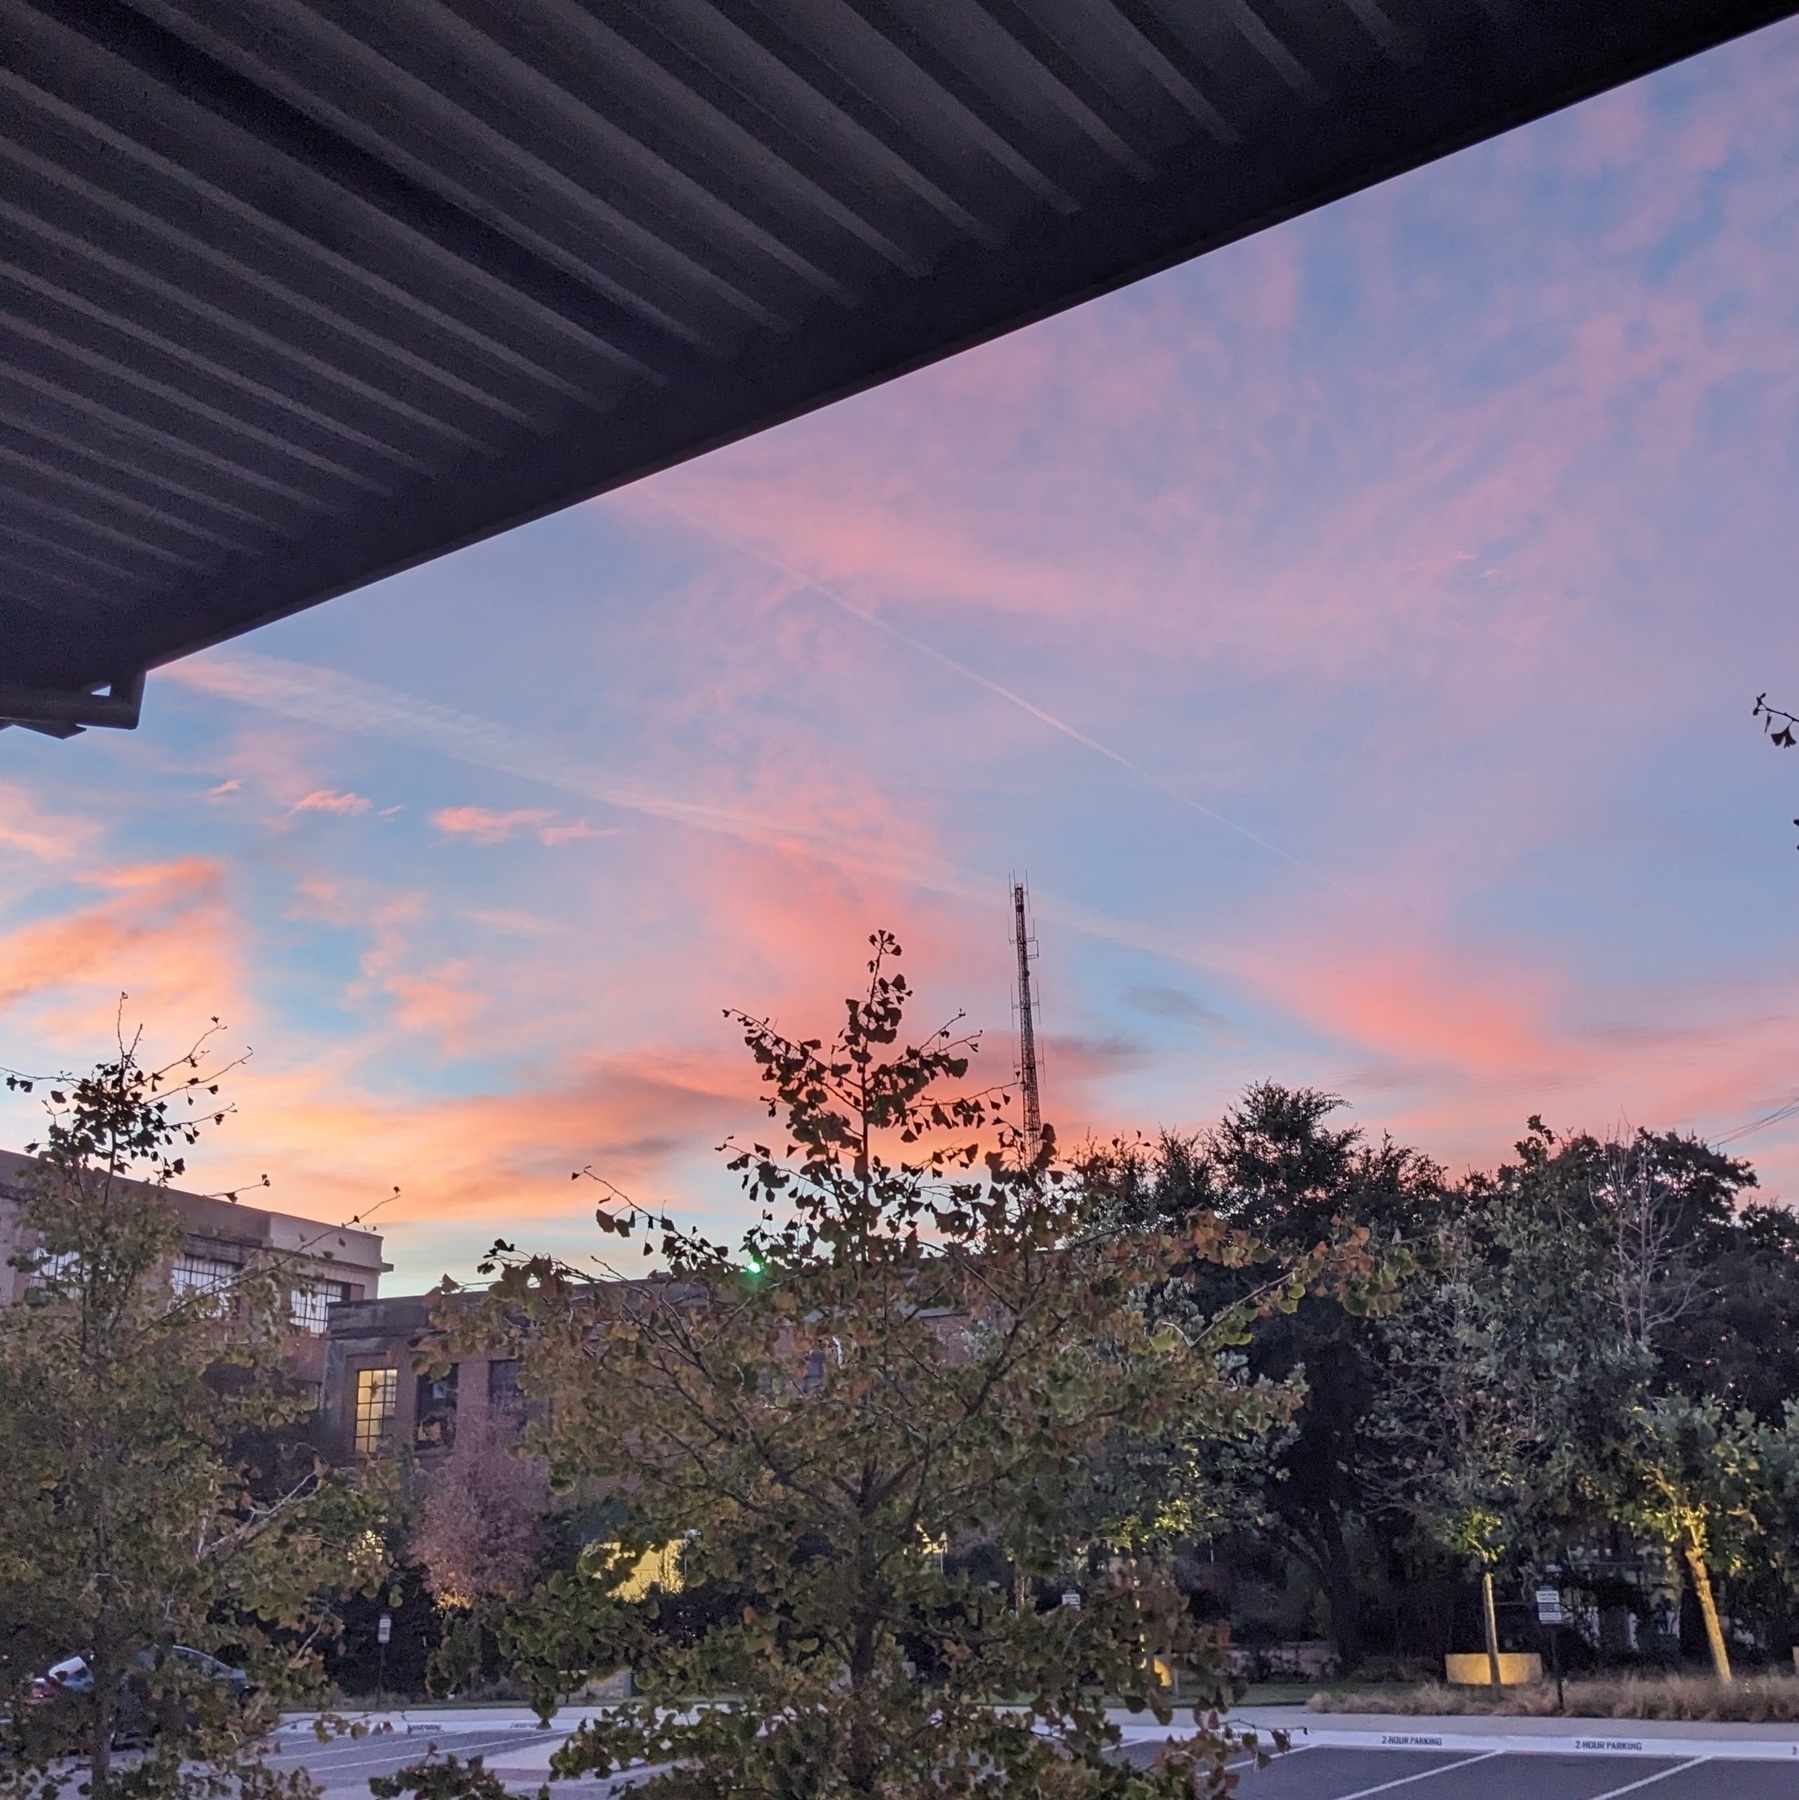 Sunrise with orangey-pink wispy clouds taken in a complex of early 1900s industrial buildings in Dallas, Texas USA on October 21, 2023